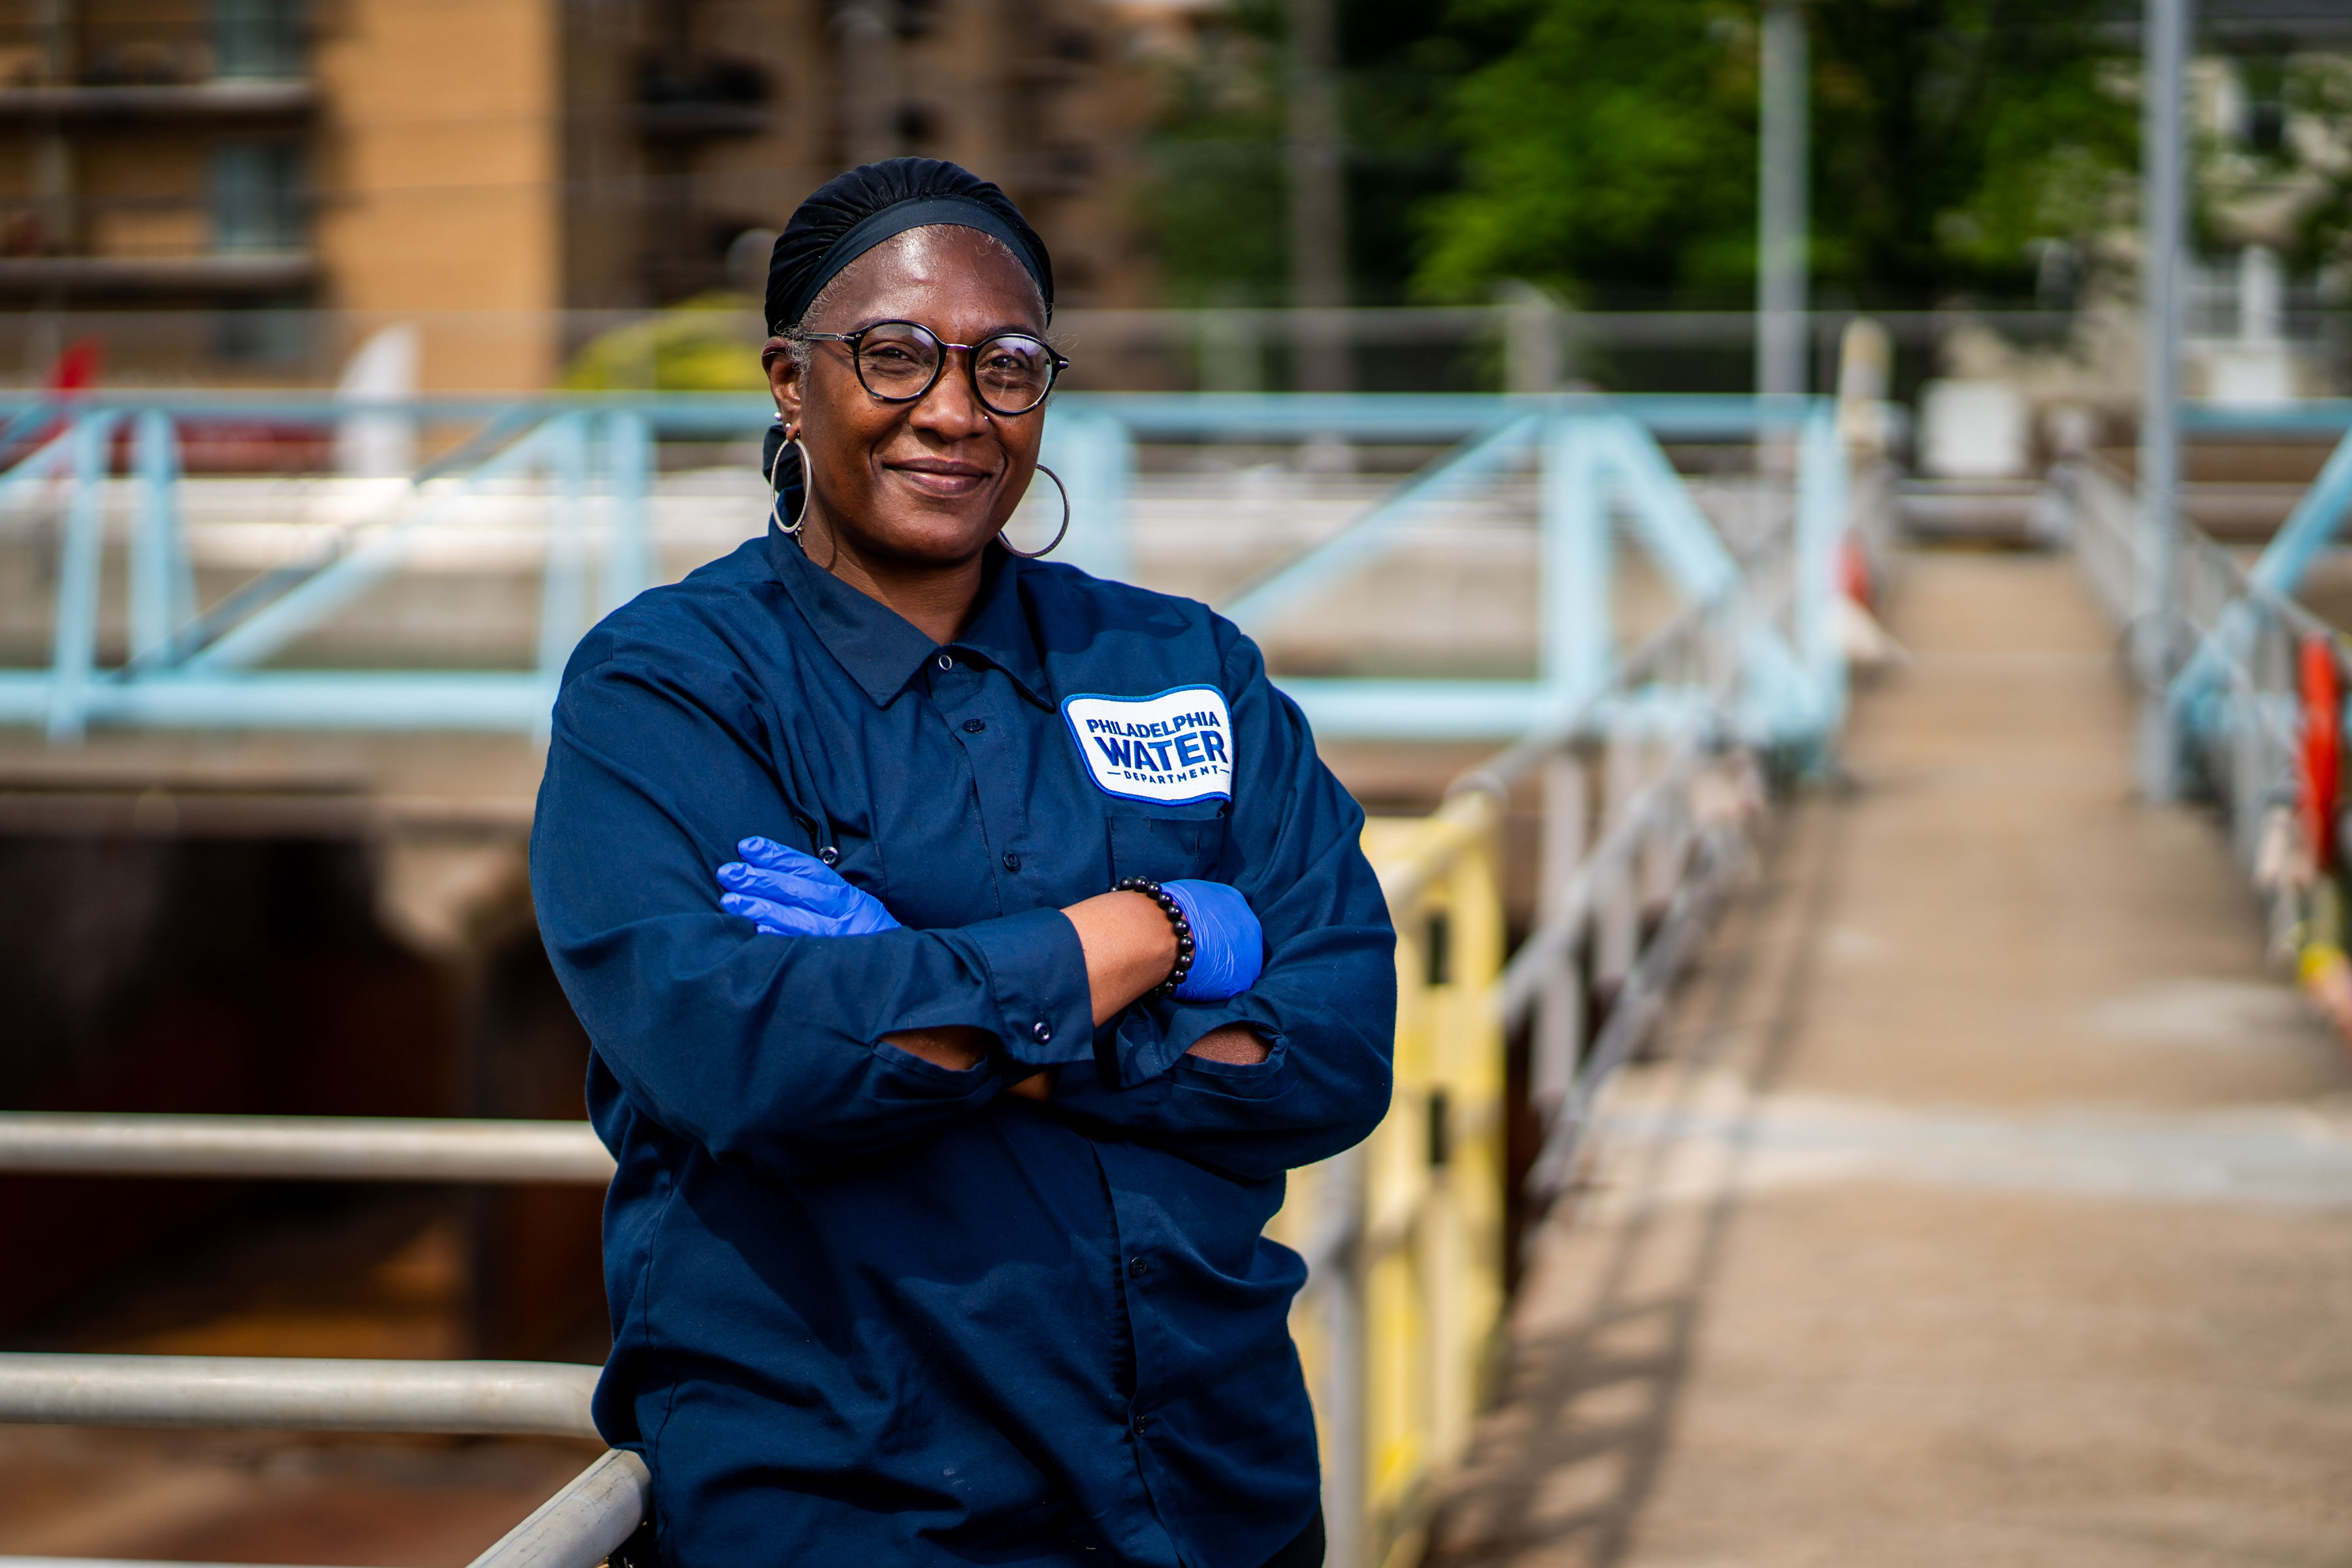 A smiling PWD employee stands with arms crossed at one of our water treatment plants, wearing navy blue coveralls with a "Philadelphia Water" patch, black glasses, hoop earrings, a black head wrap, and blue disposable gloves.